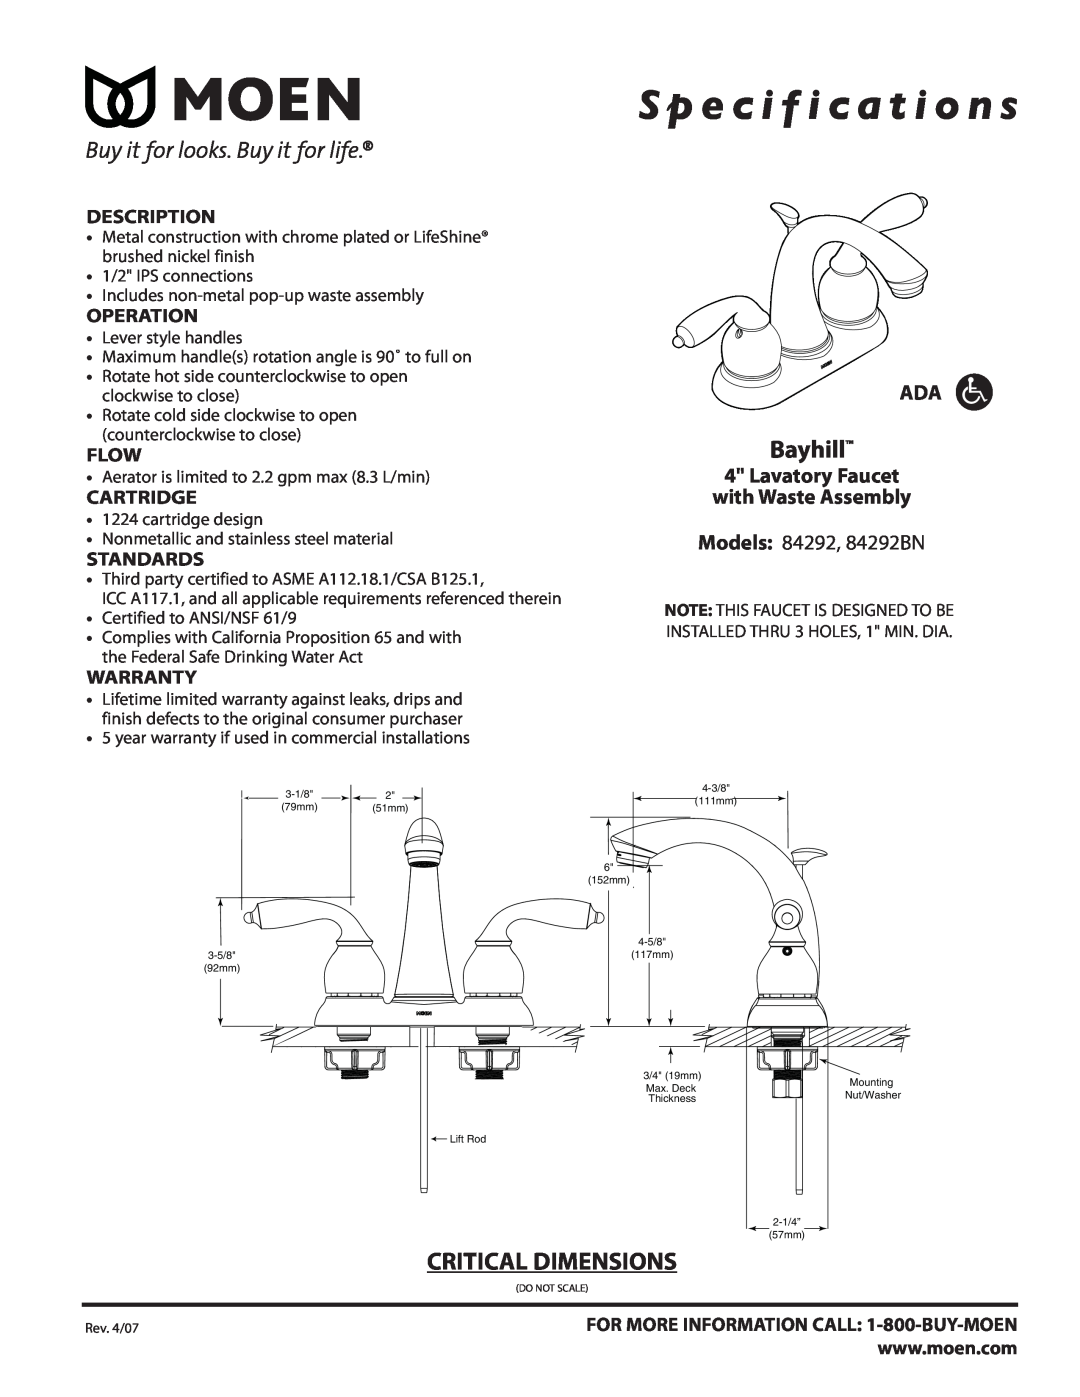 Moen 84292 specifications S p e c i f i c a t i o n s, Bayhill, Critical Dimensions, Lavatory Faucet with Waste Assembly 